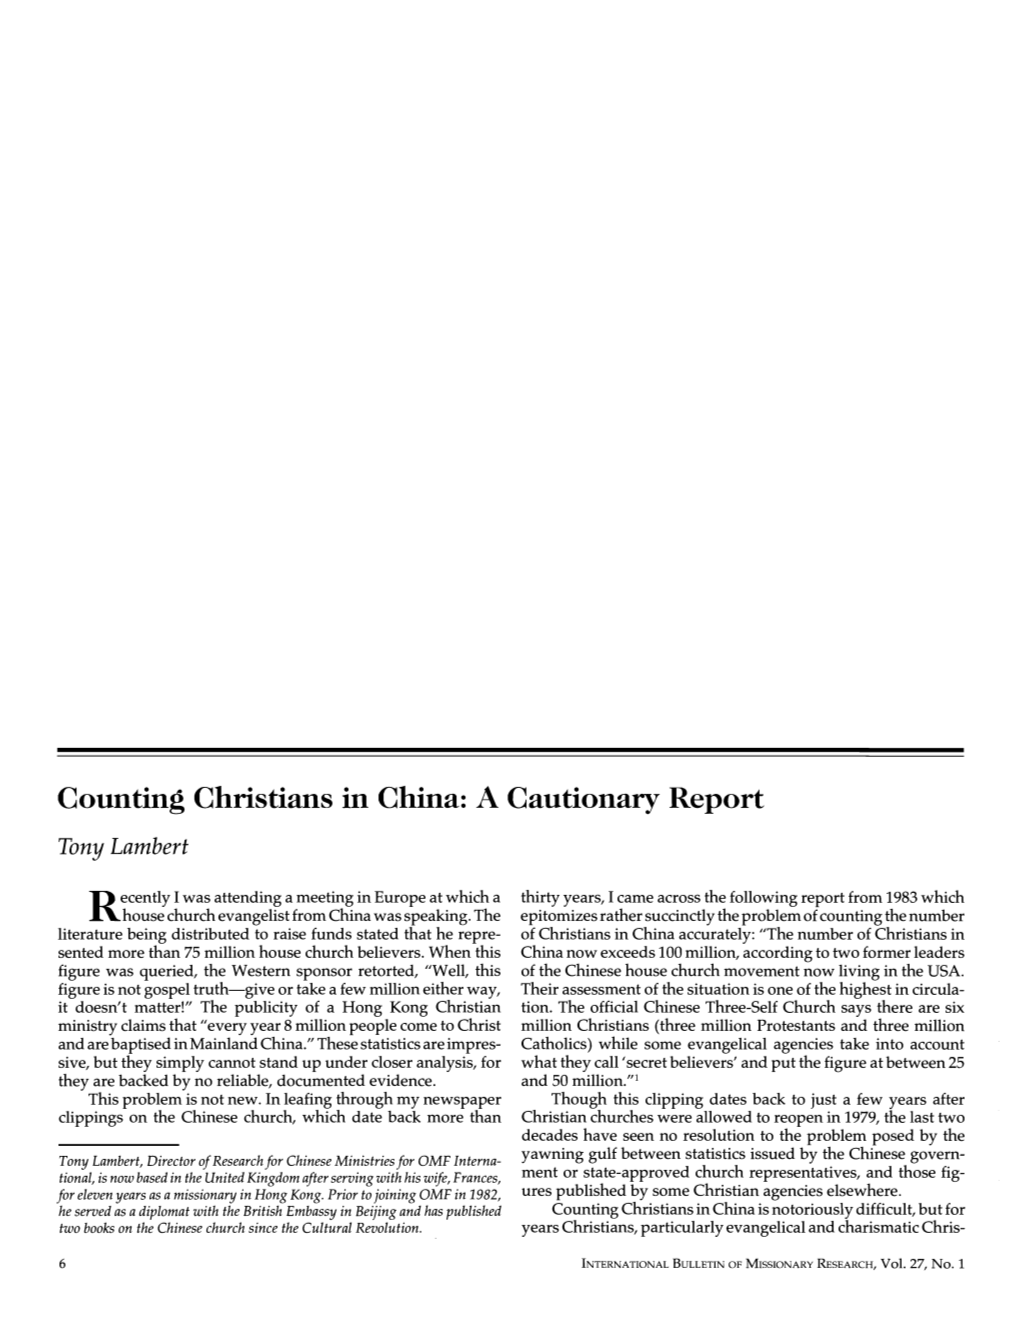 Counting Christians in China: a Cautionary Report Tony Lambert